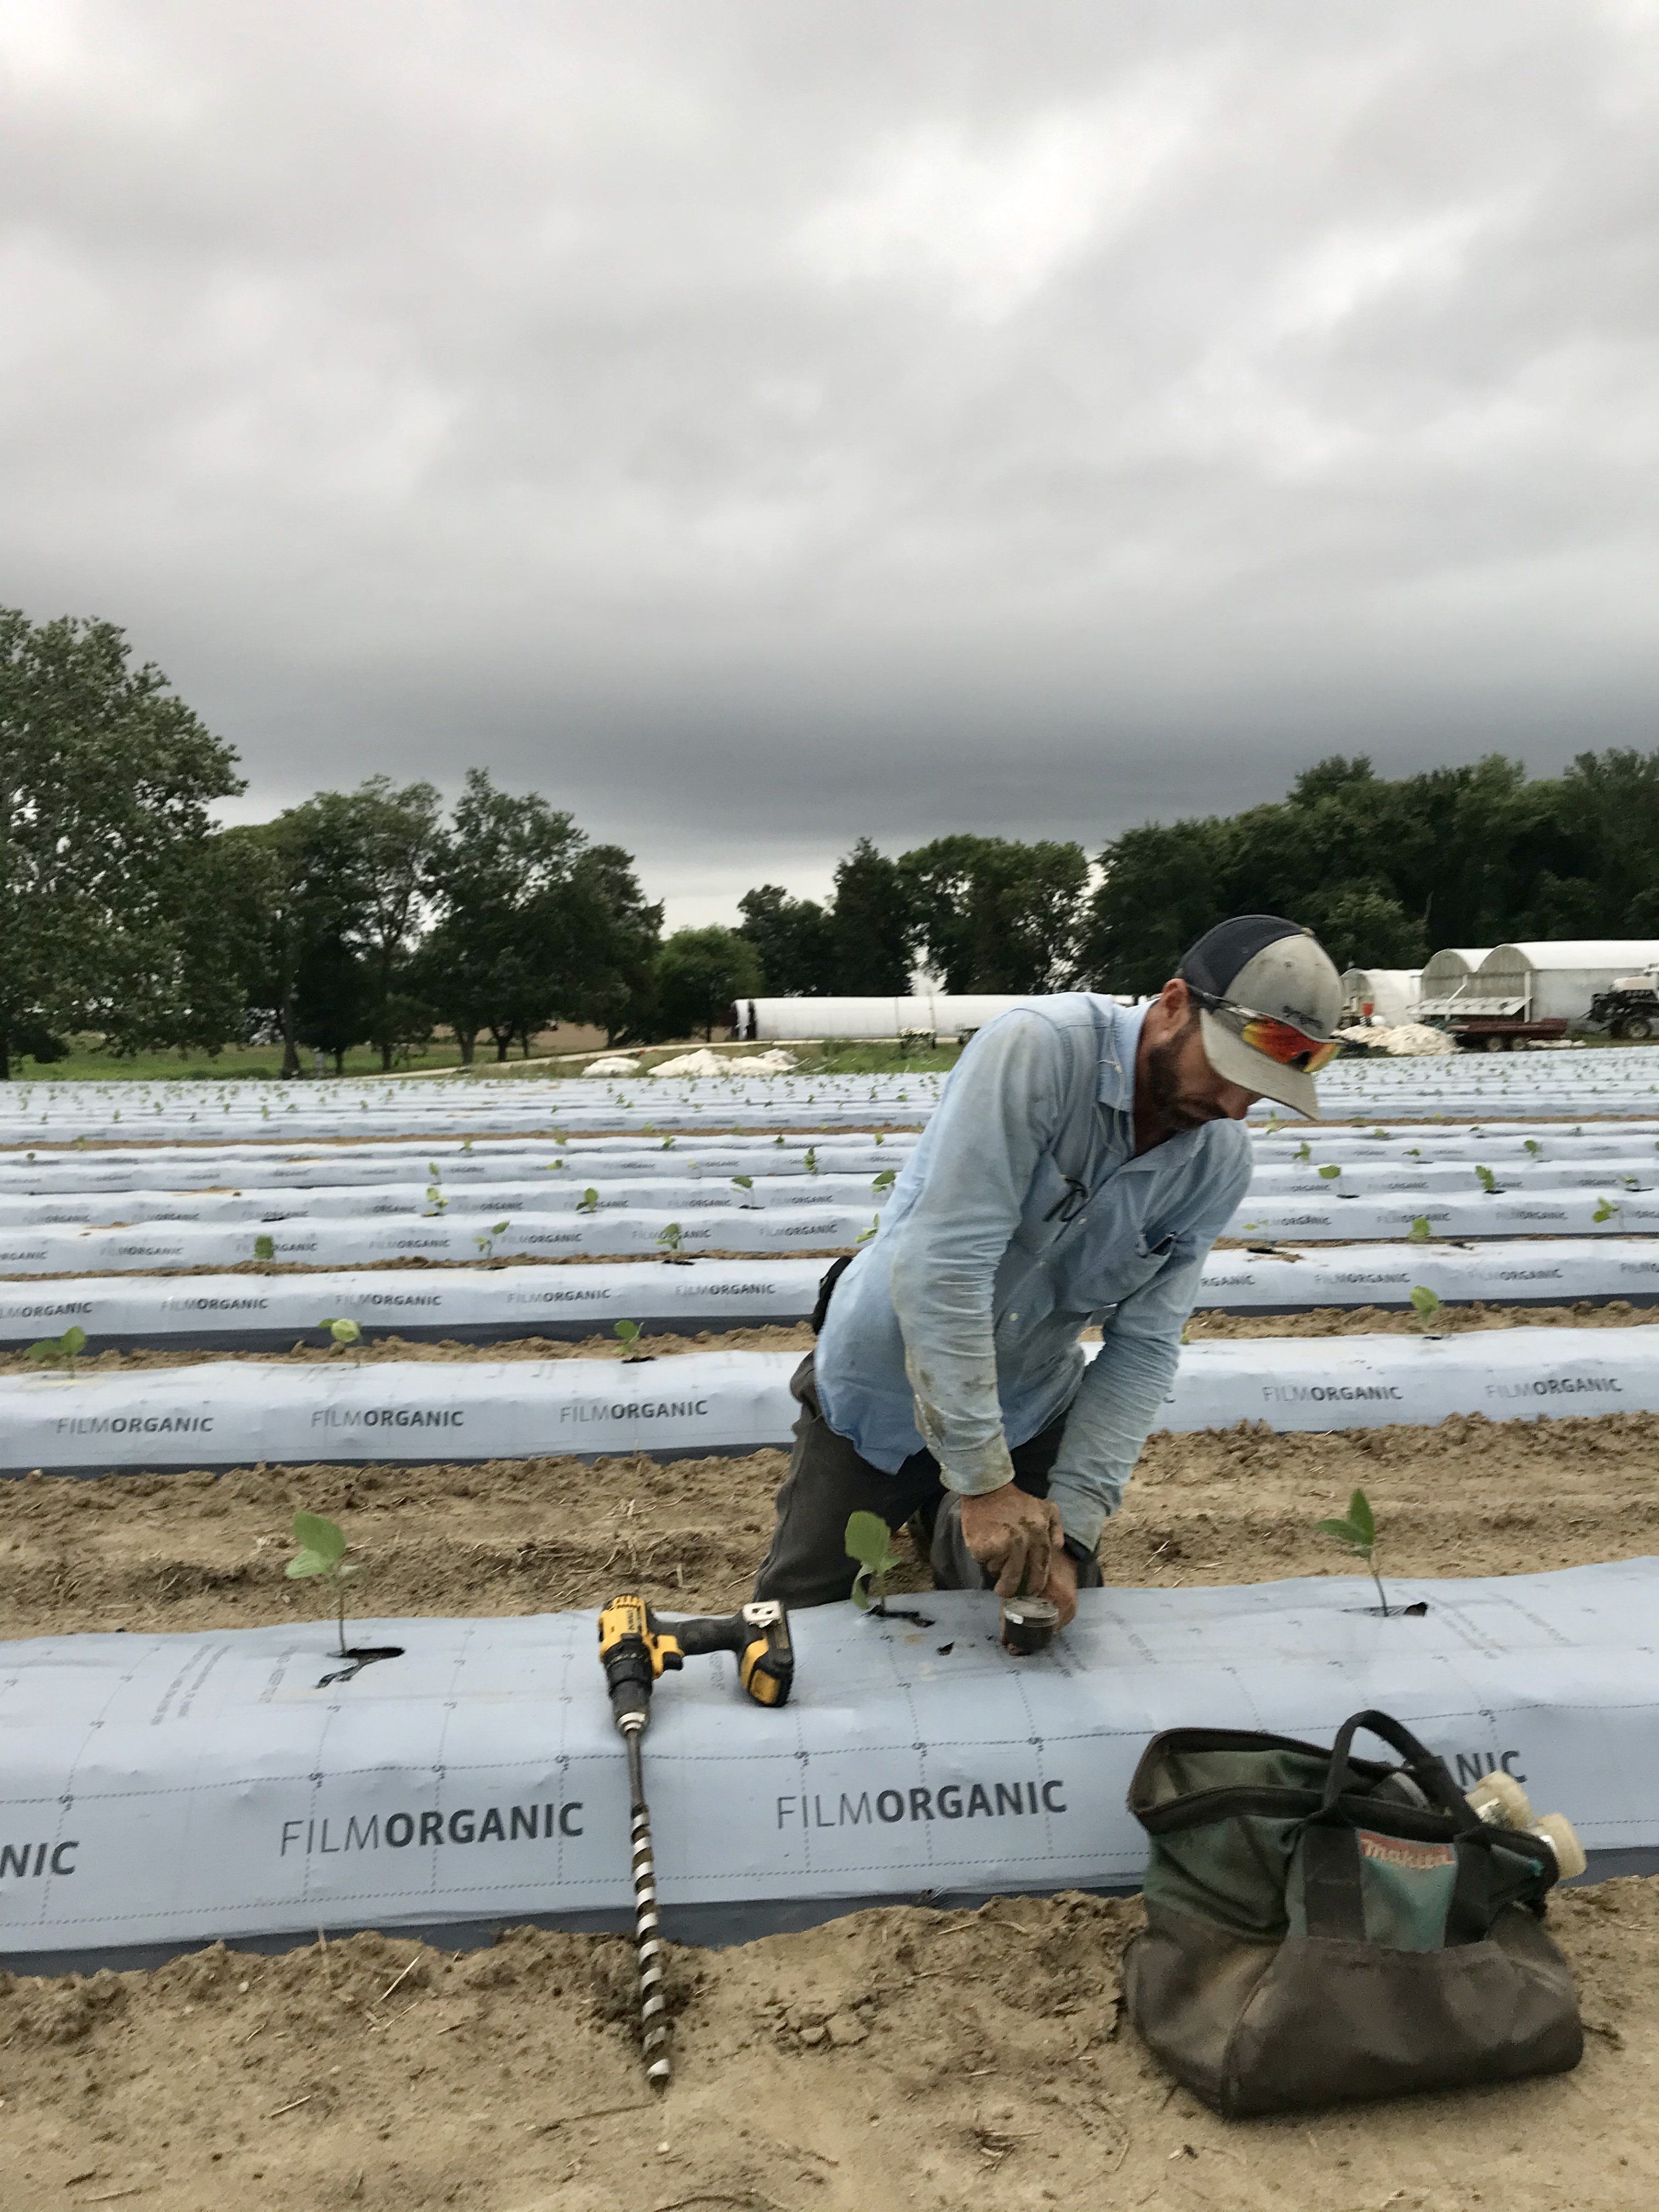 Next Happening: Farm Happenings for July 13, 2020